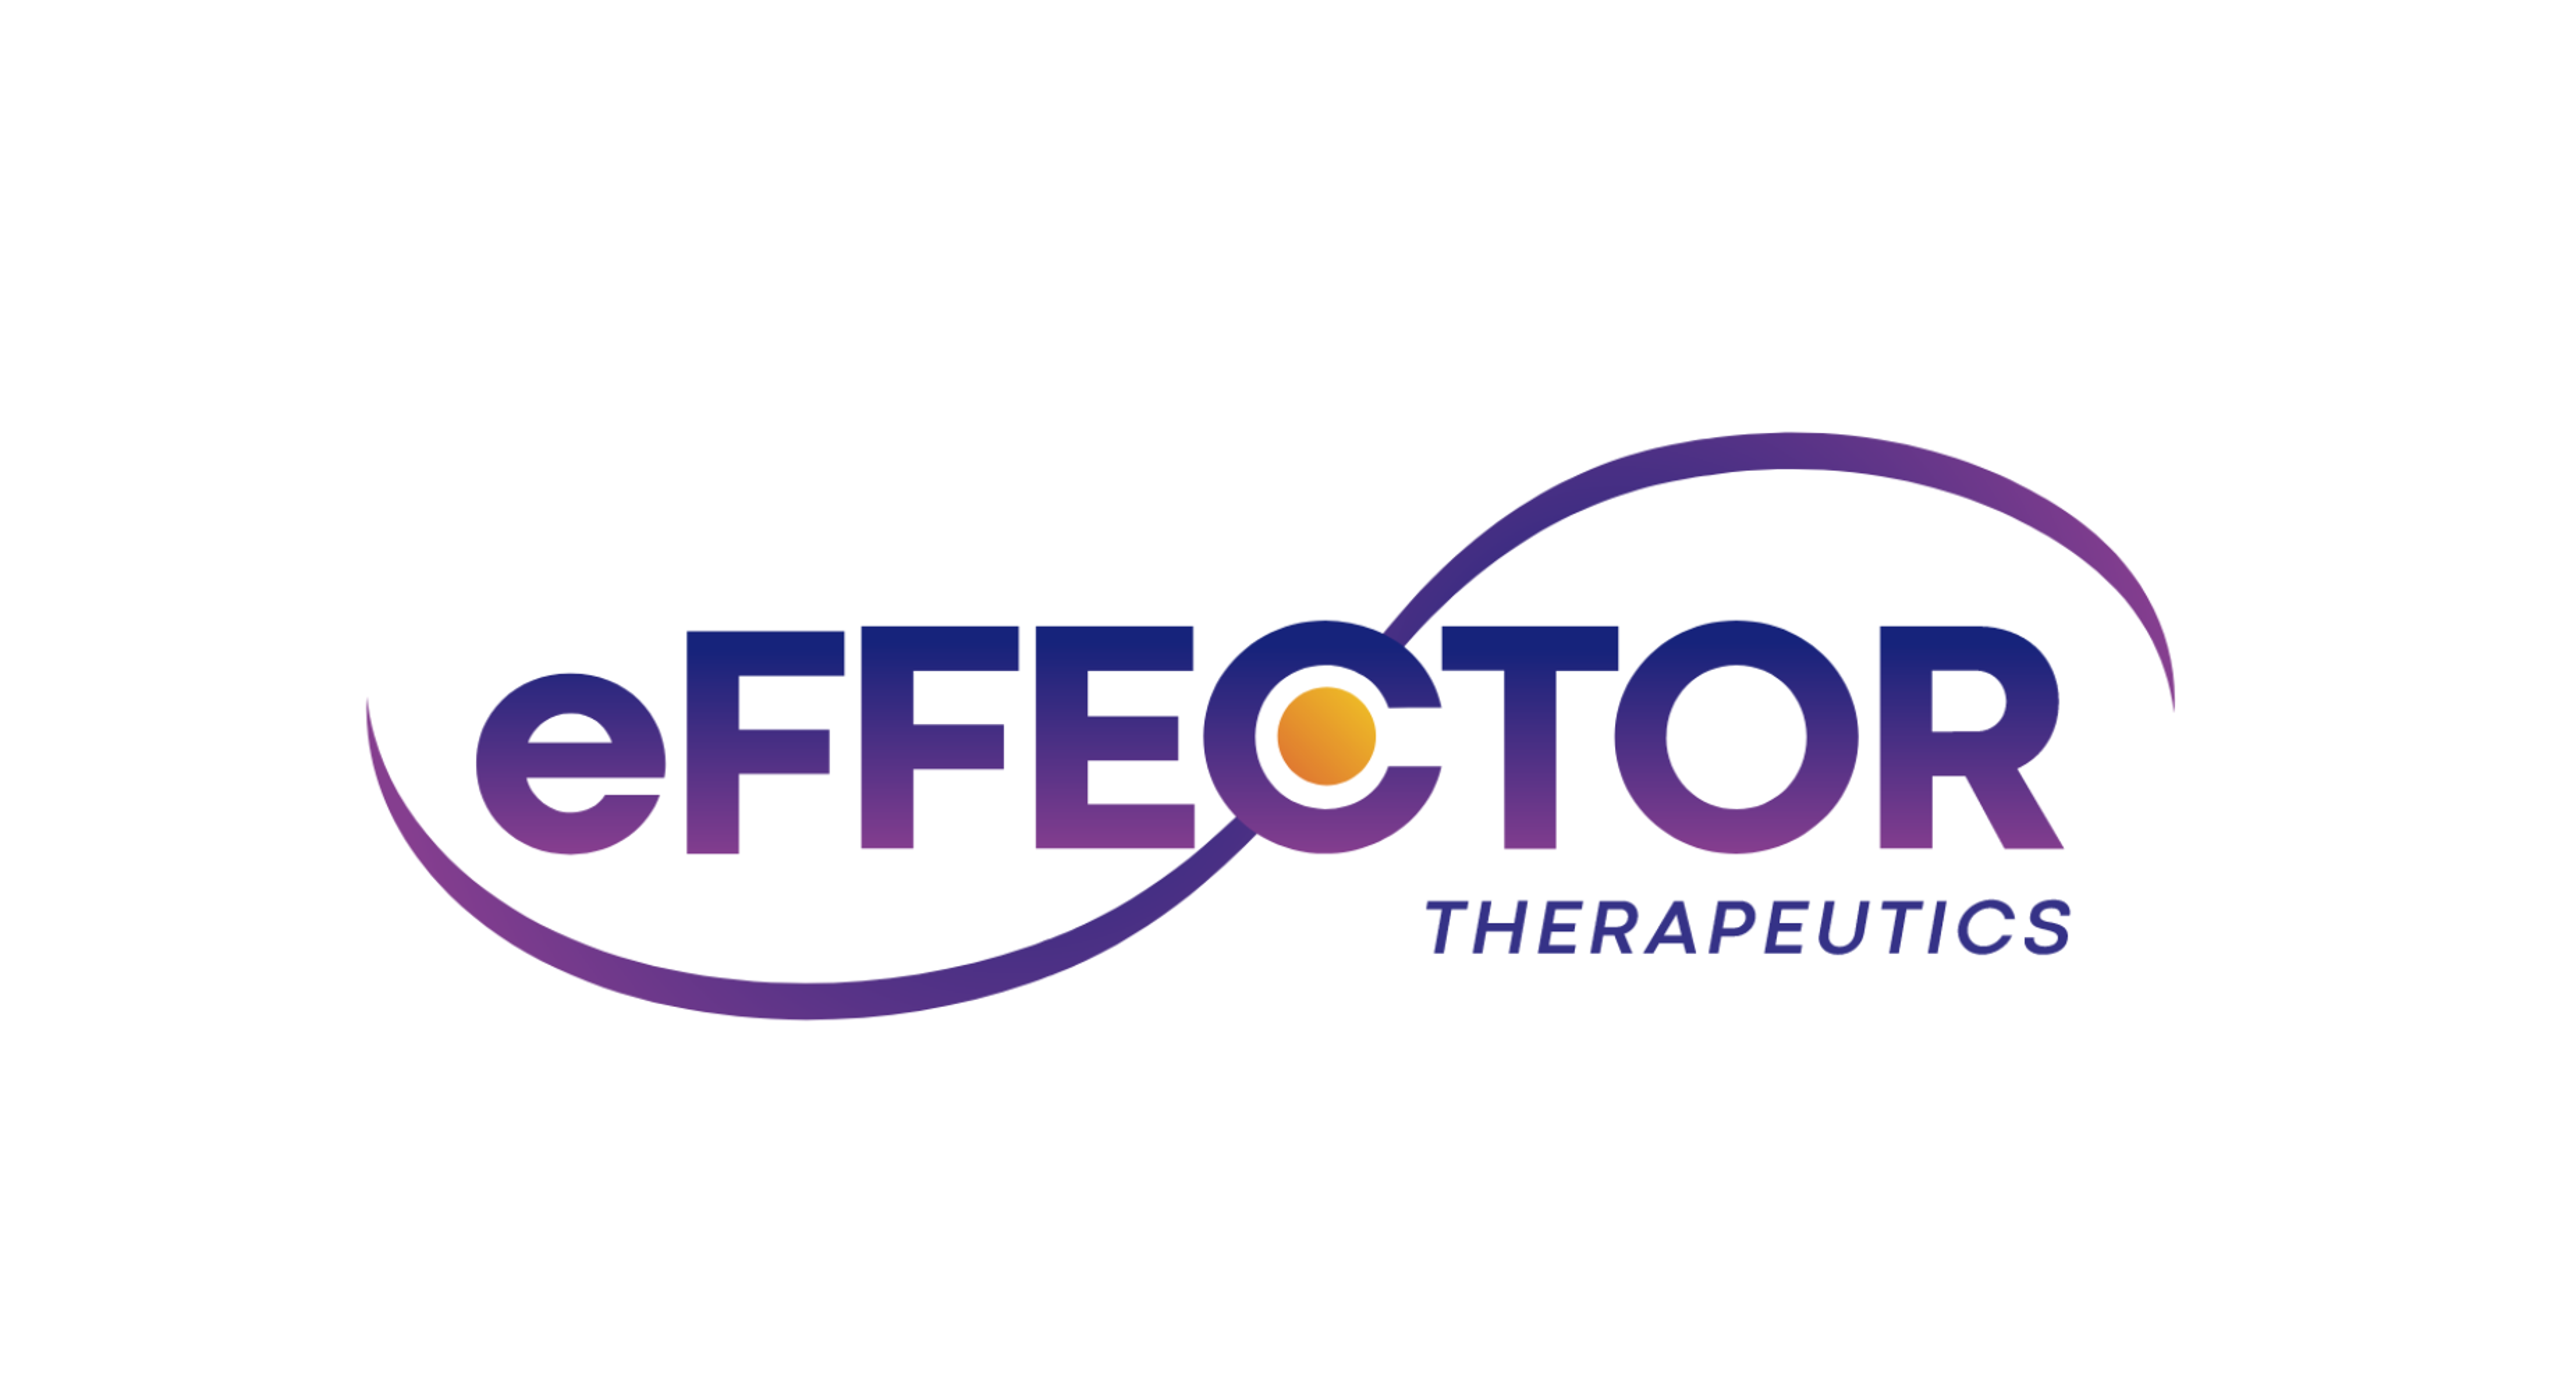 Why eFFECTOR Therapeutics Shares Trading Higher Today